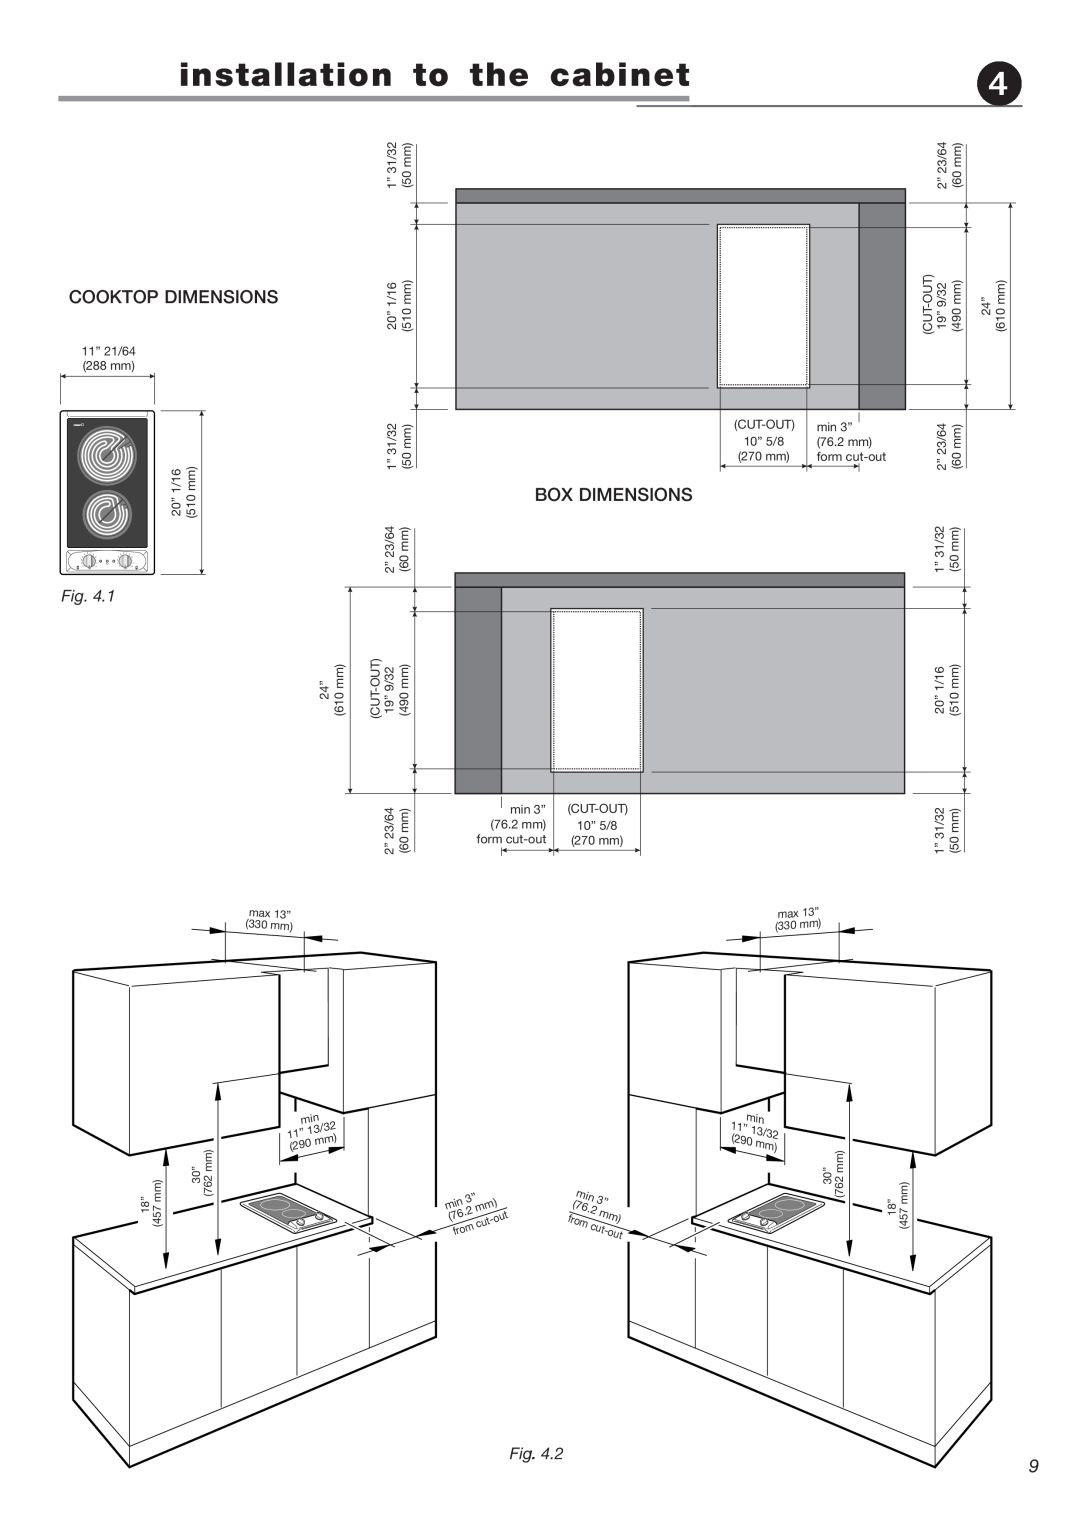 Verona VEECT212F operating instructions installation to the cabinet, Cooktop Dimensions, Box Dimensions, from 